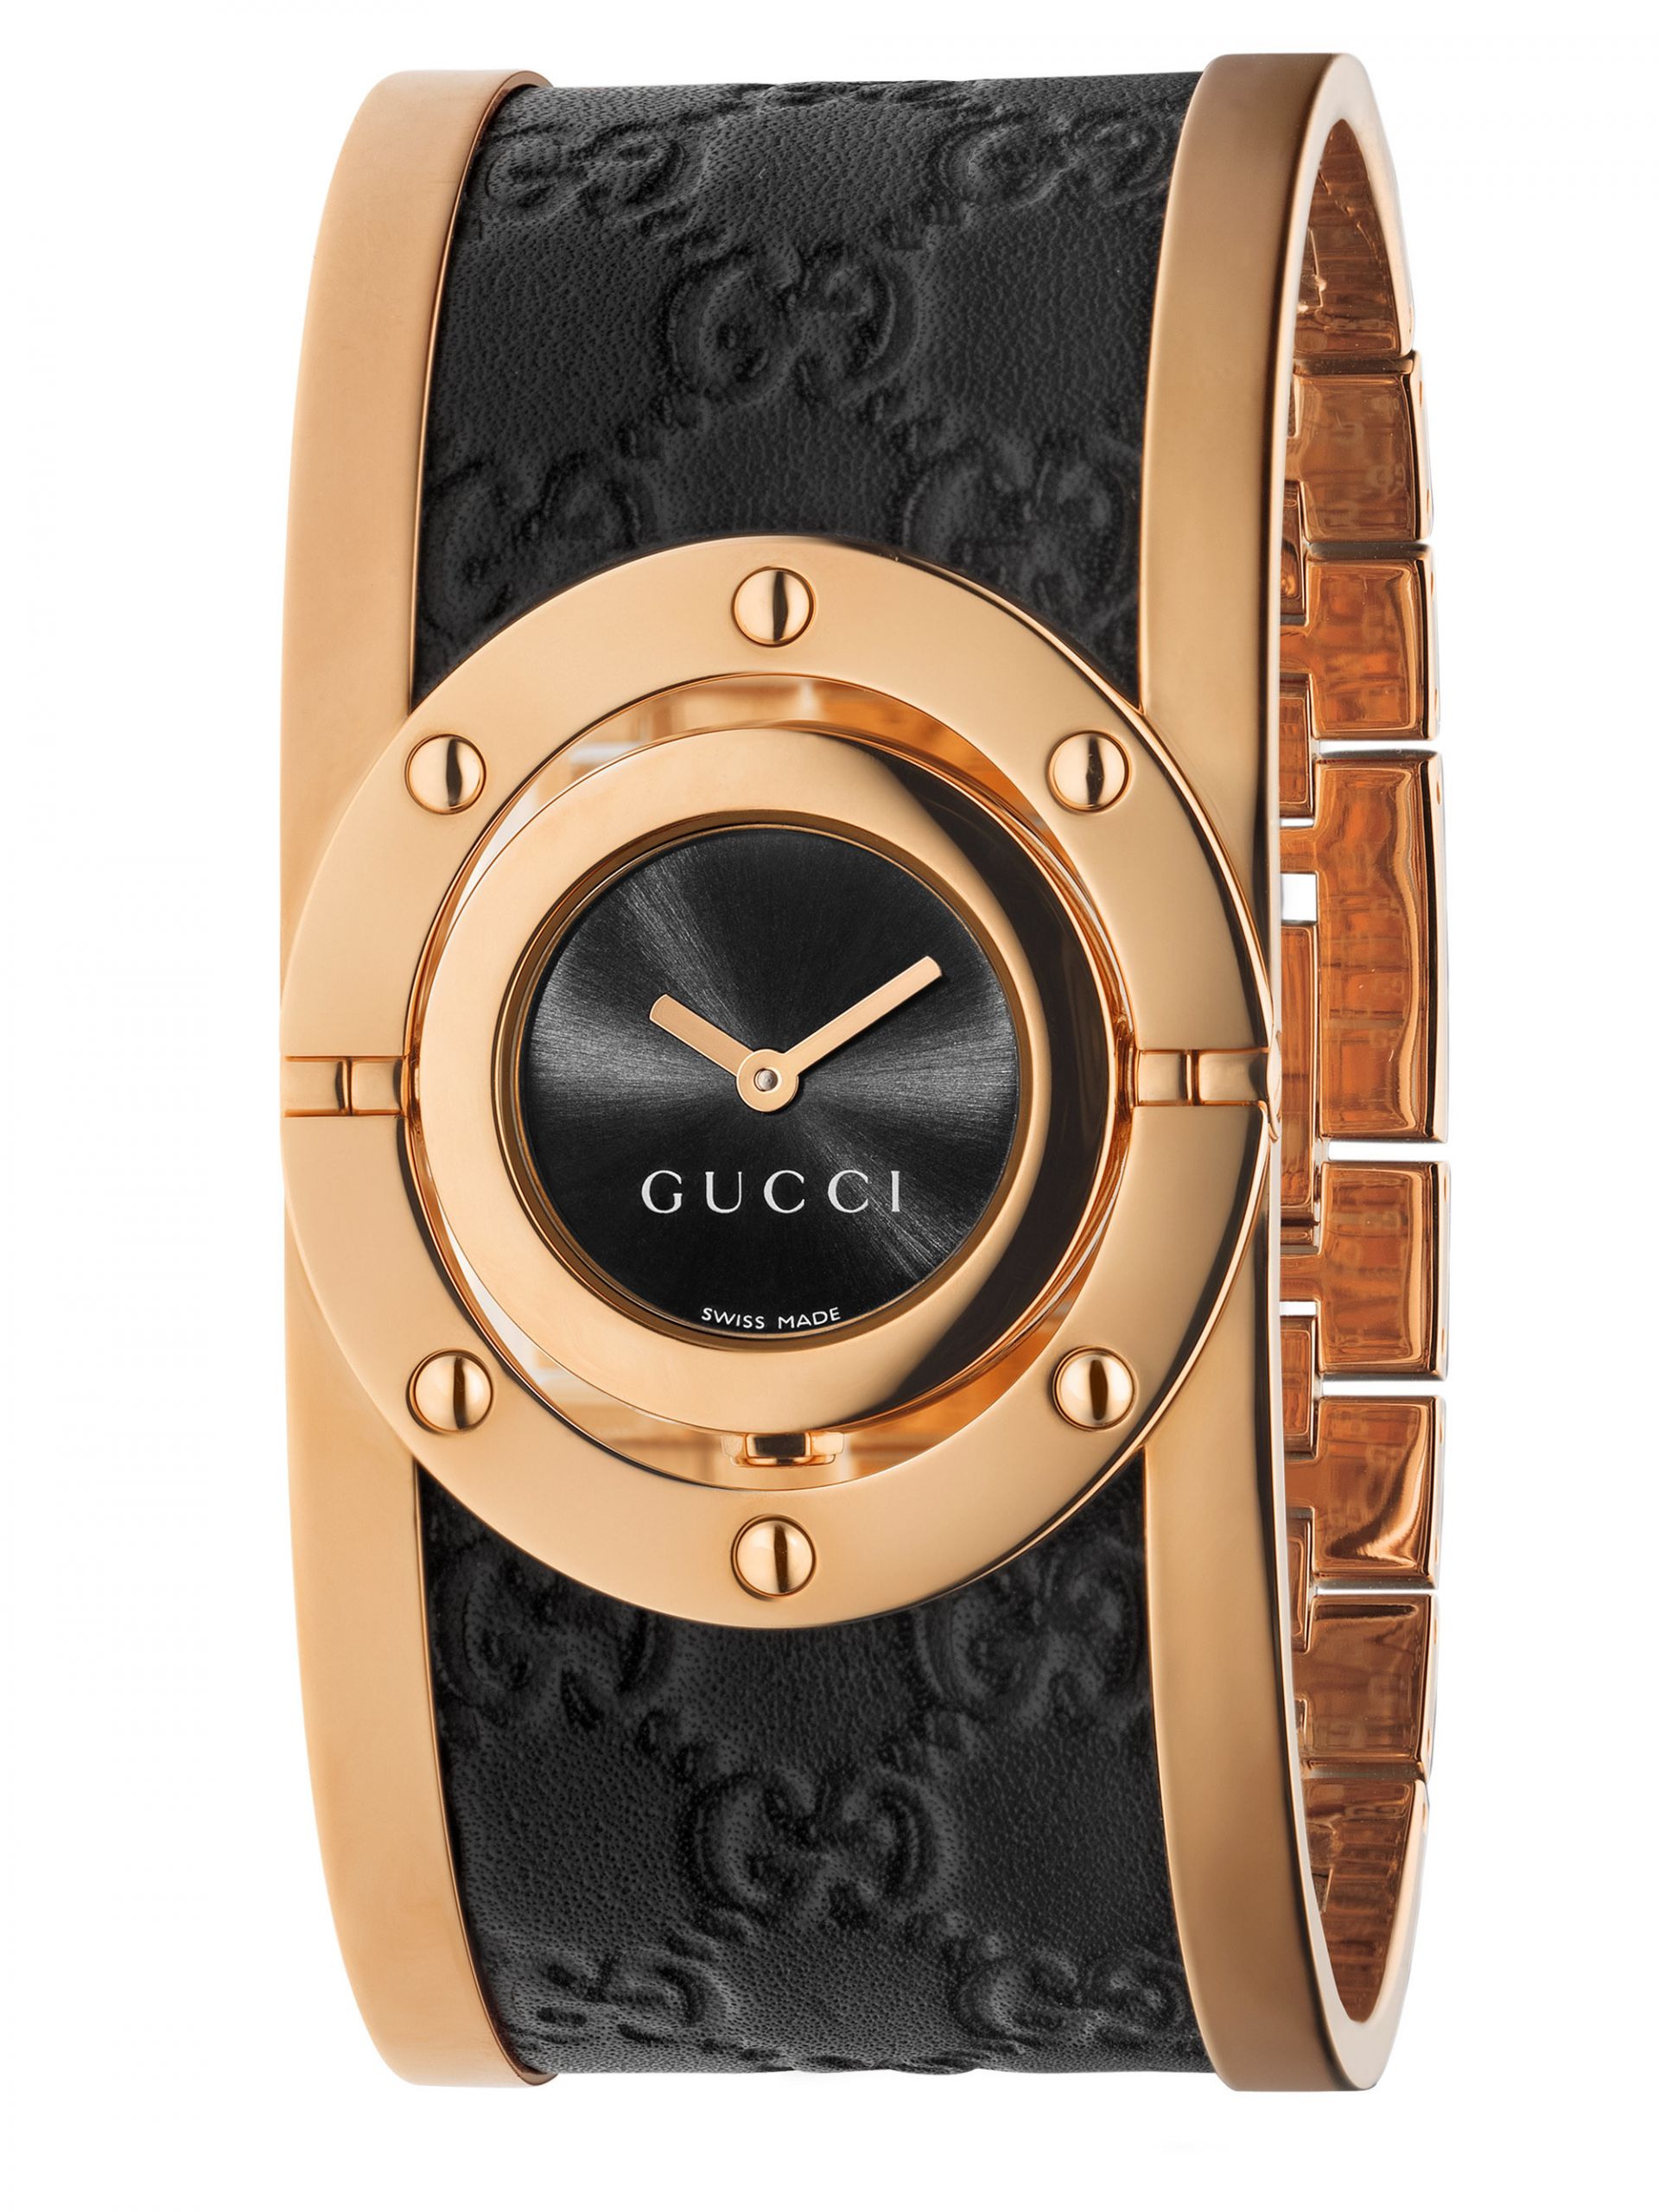 Gucci Bracelet Watch
 Gucci Twirl Pink Goldtone Pvd Stainless Steel & Leather